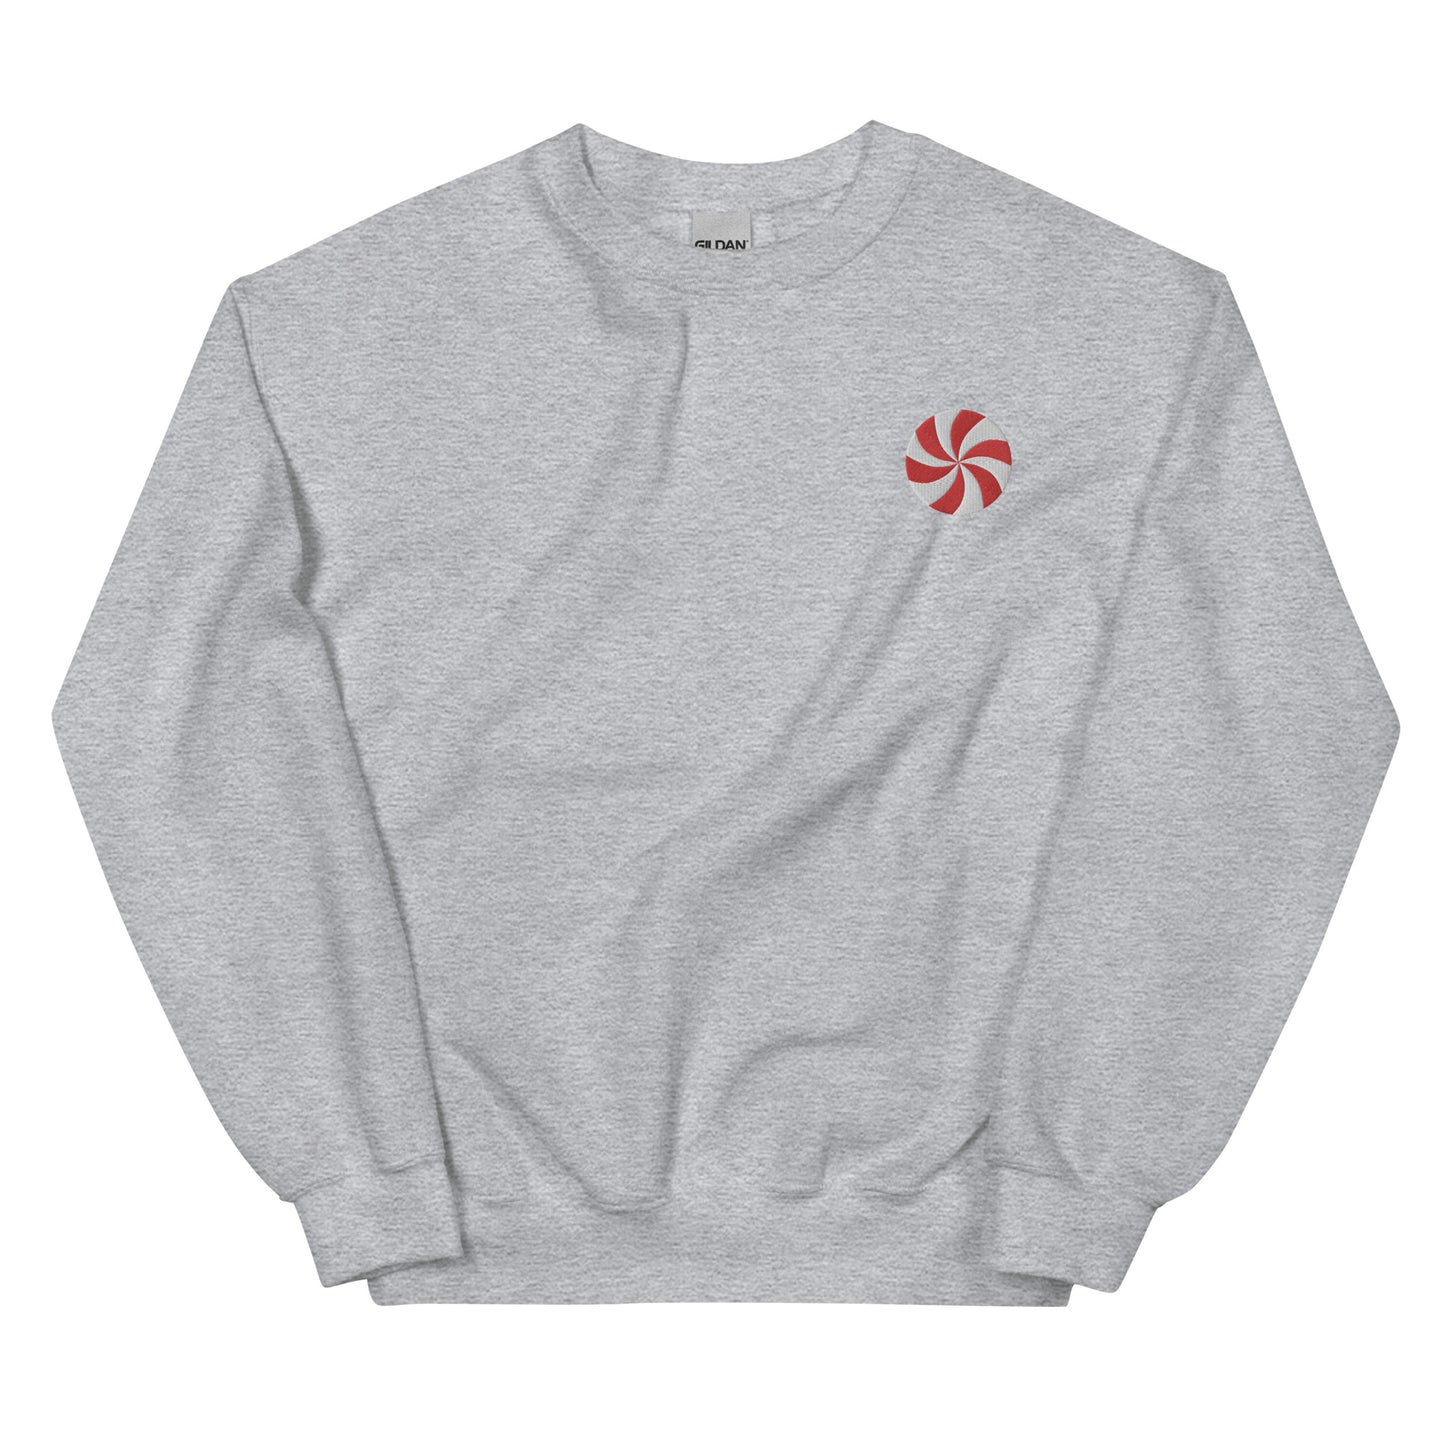 Red Peppermint Embroidered Sweatshirt